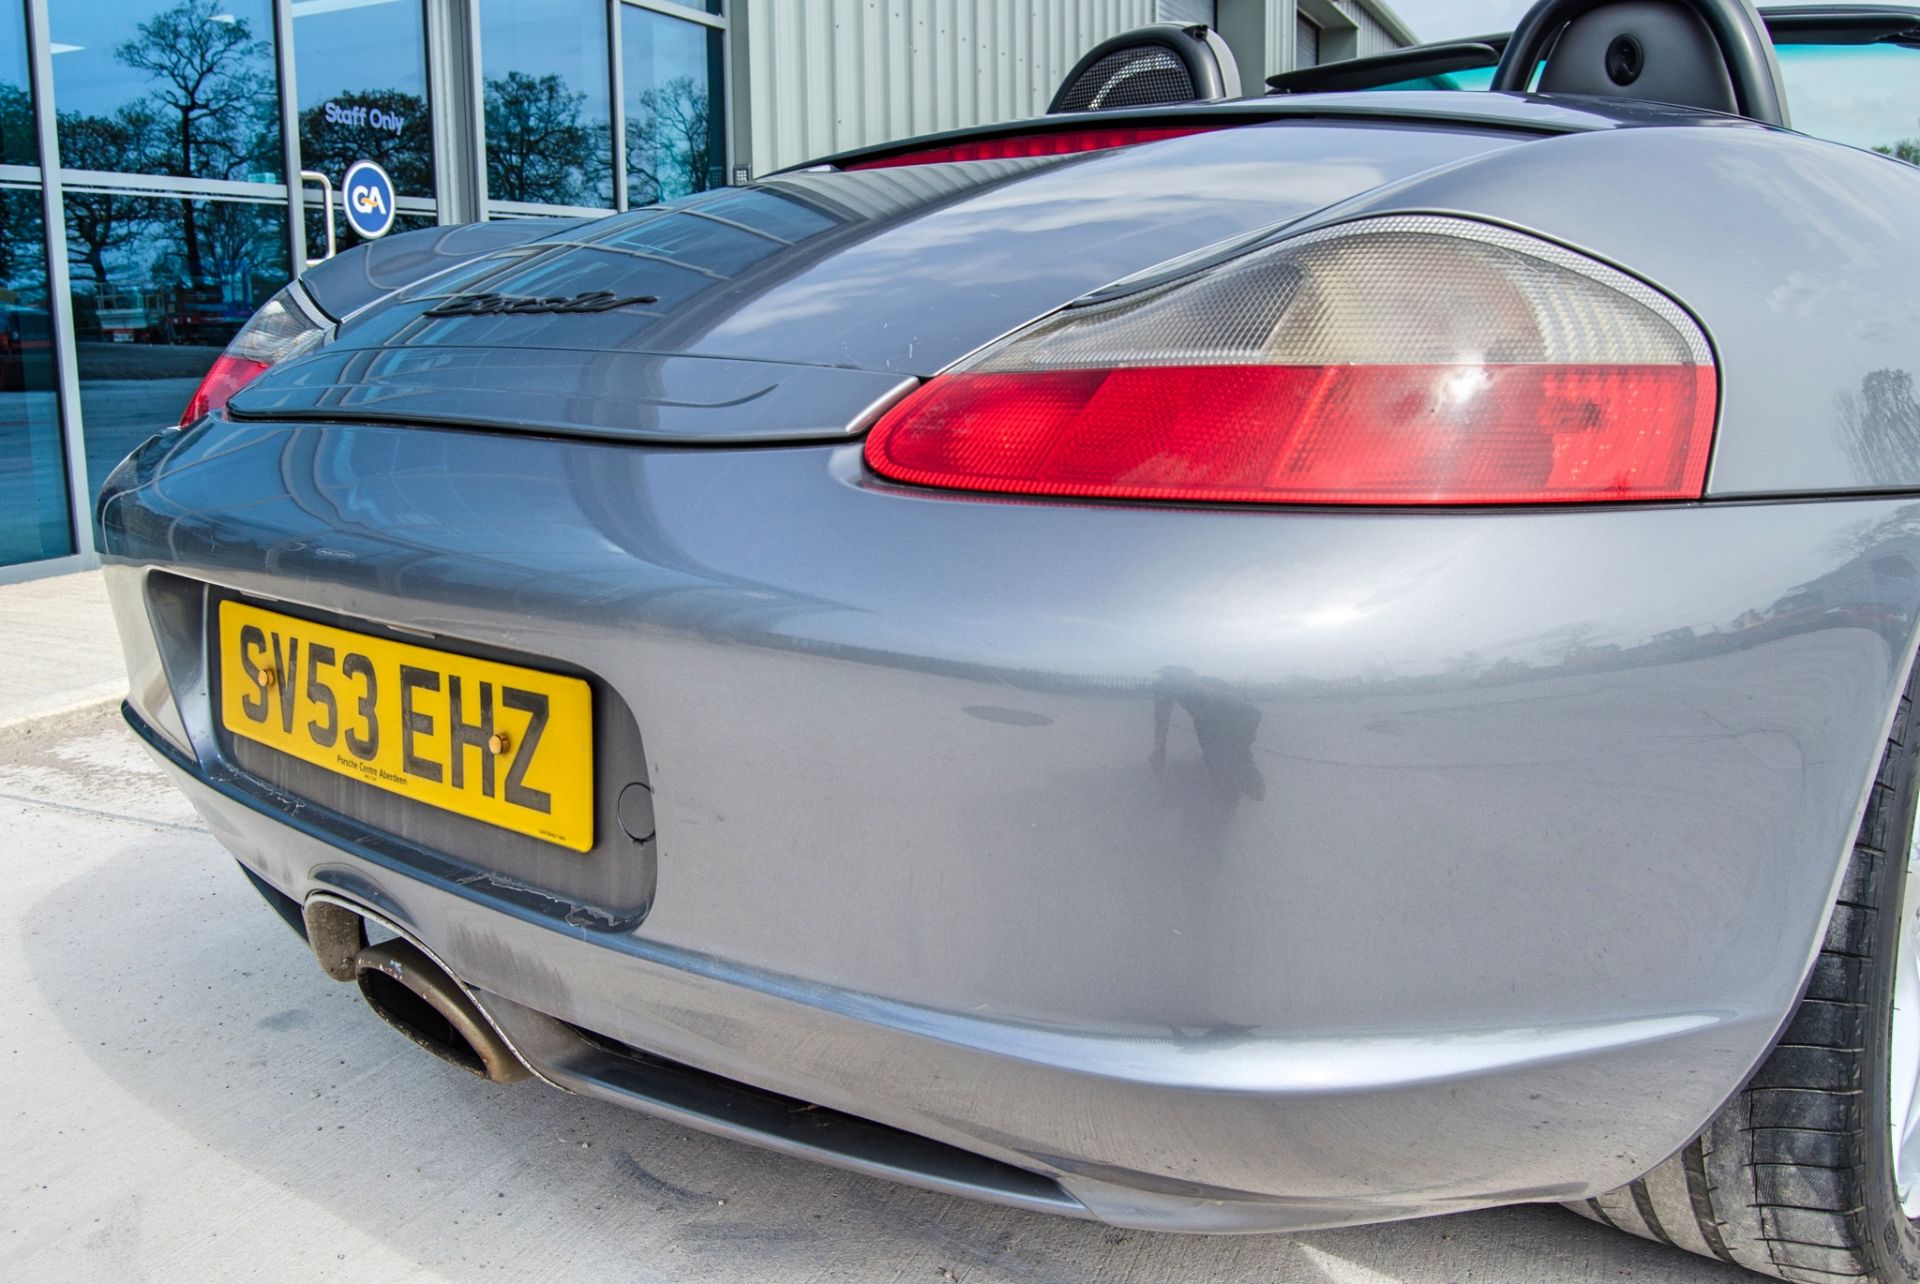 2003 Porsche Boxster 2.7 5 speed manual convertible roadster - Image 20 of 50